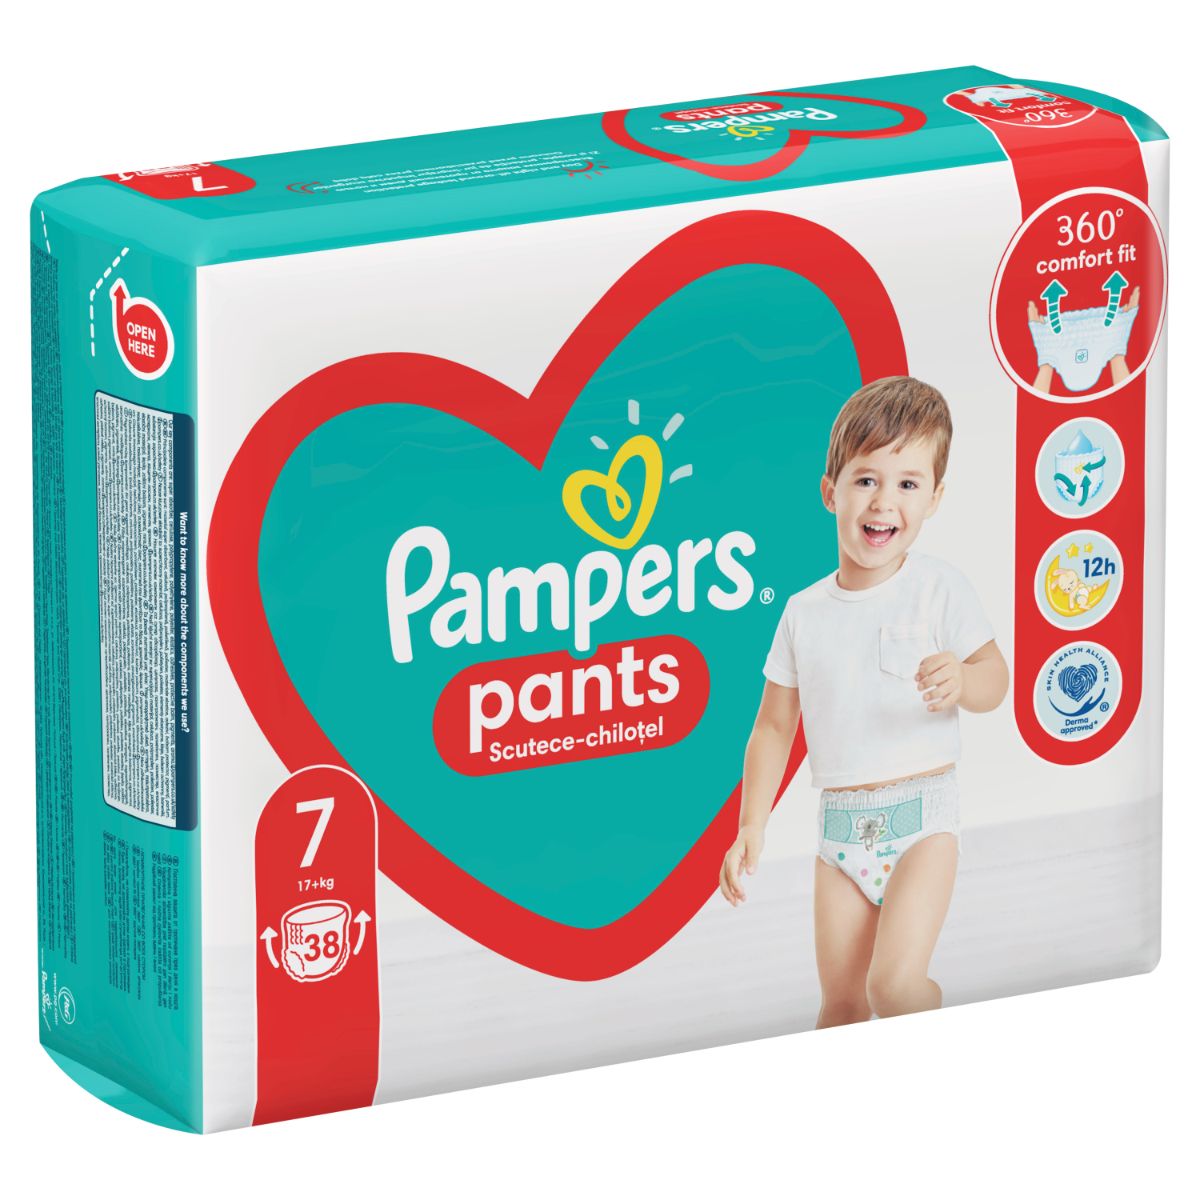 Scutece Pampers 7 Chilotel Act Baby, 17+ kg, 38 buc (17 imagine 2022 protejamcopilaria.ro